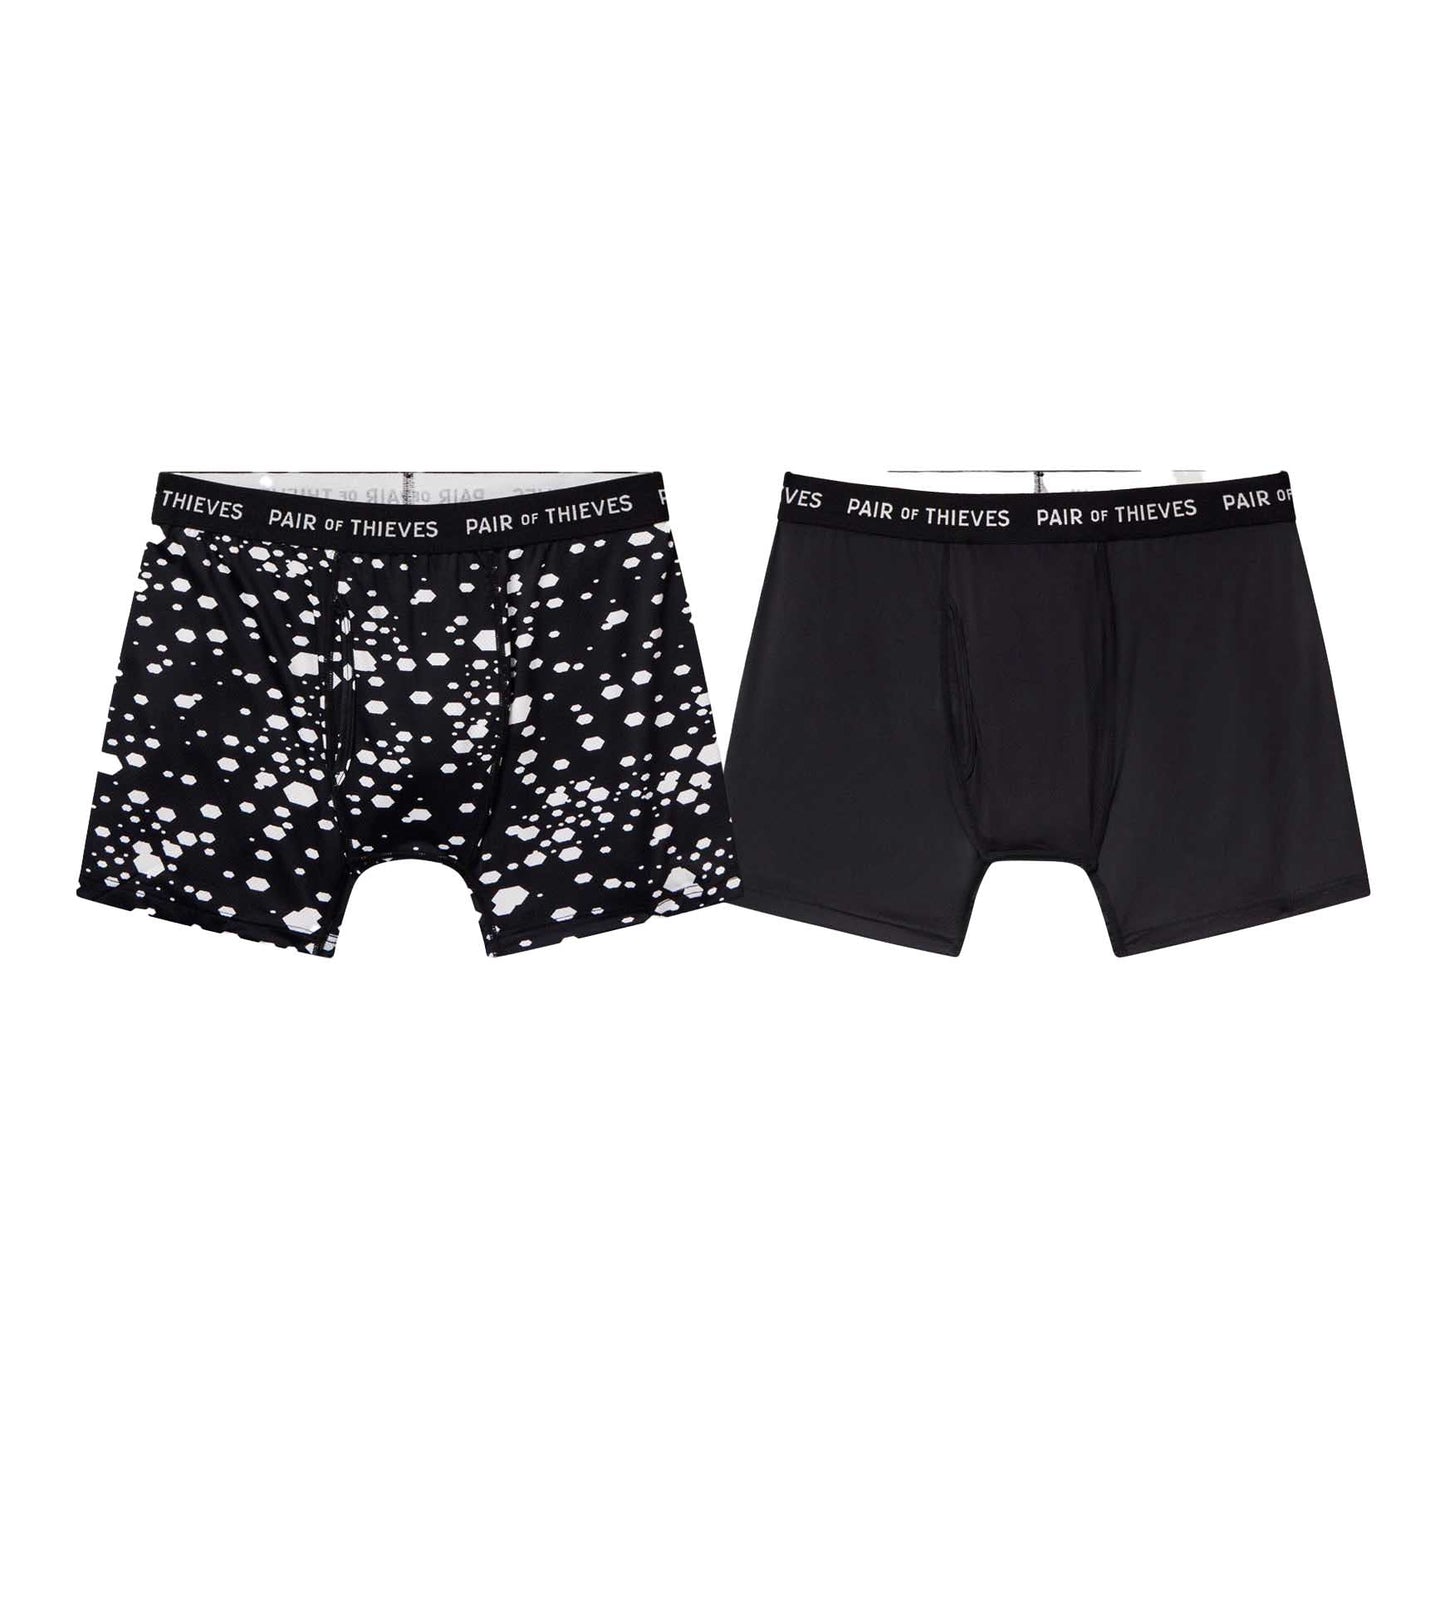 Boxers vs Boxer Briefs – Pair of Thieves